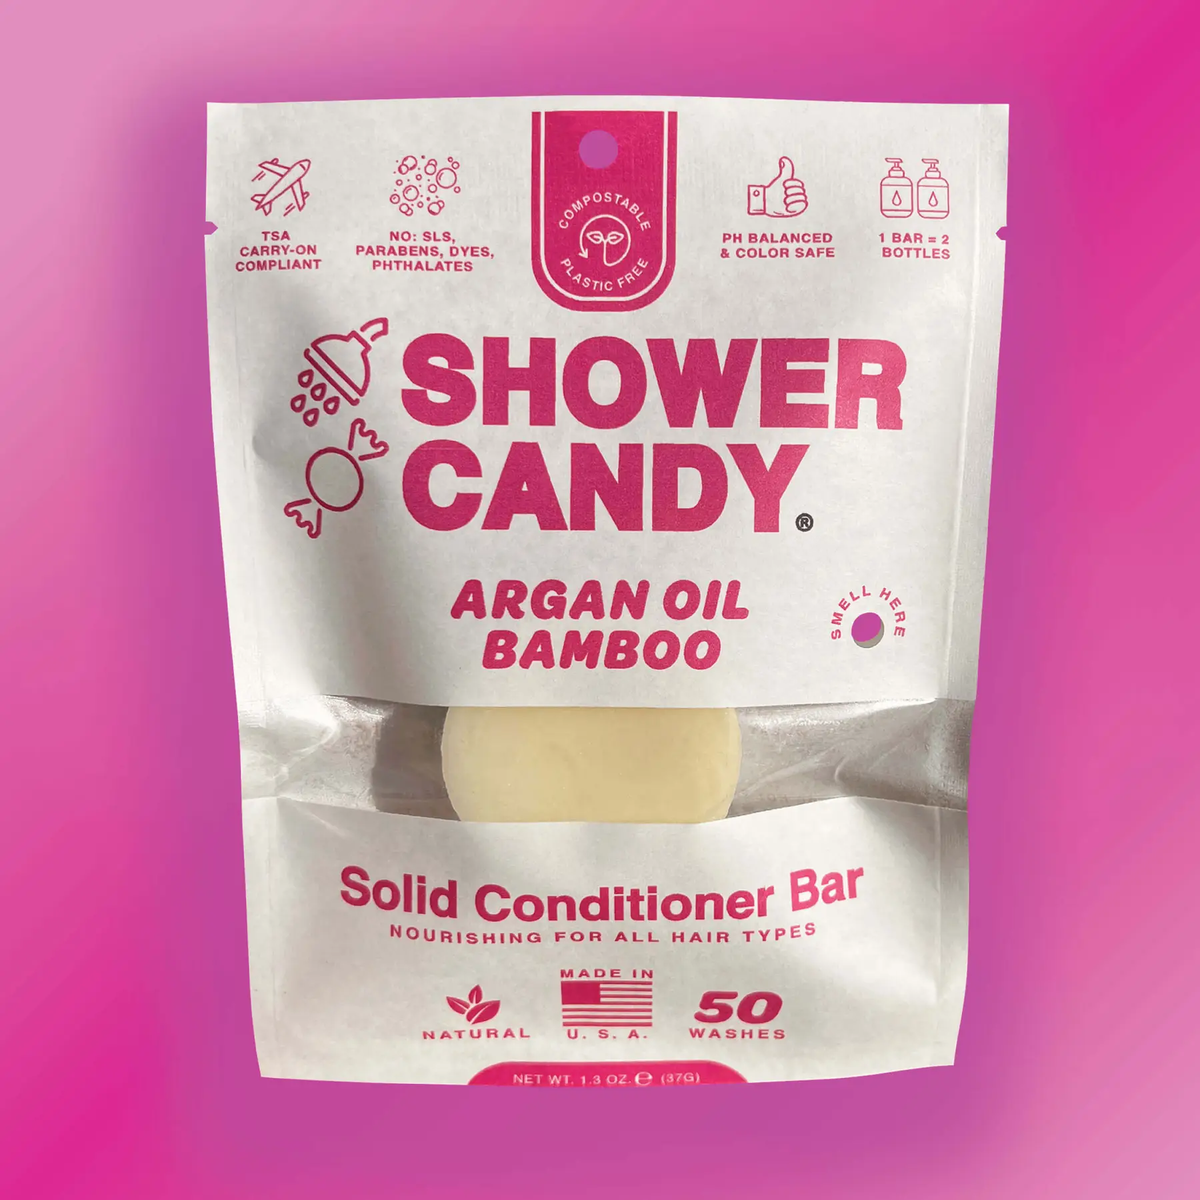 Shower Candy - Argan Oil Bamboo Natural Conditioner Bar